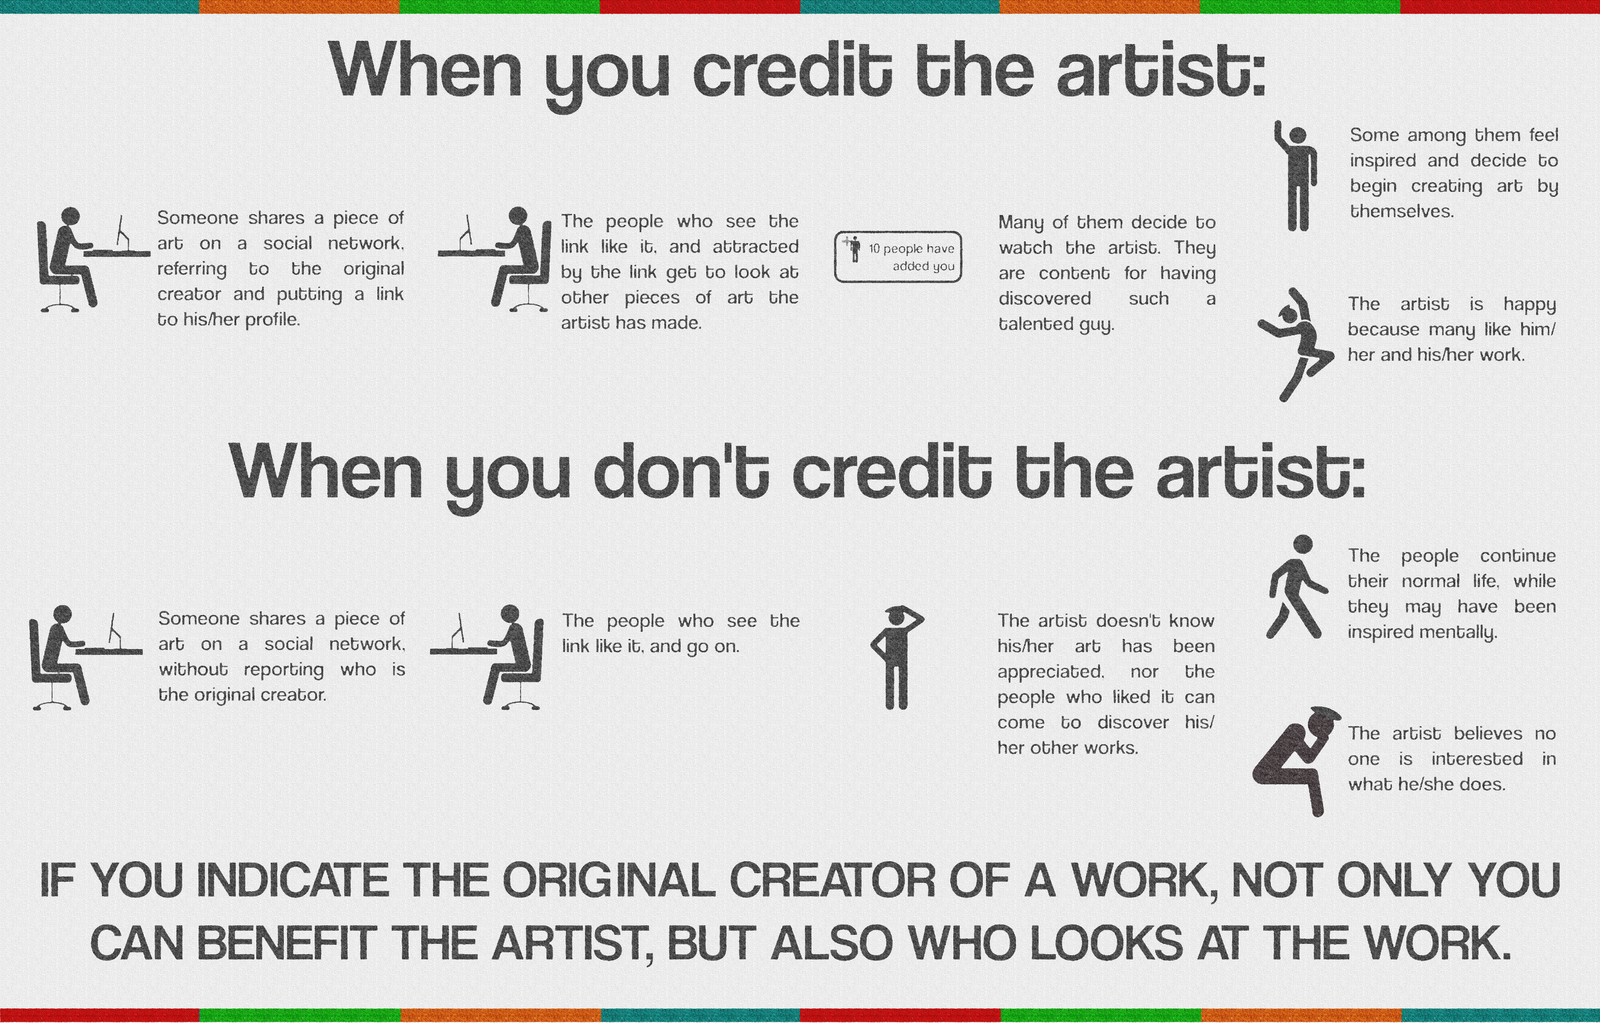 Why should you give credit to the artist?